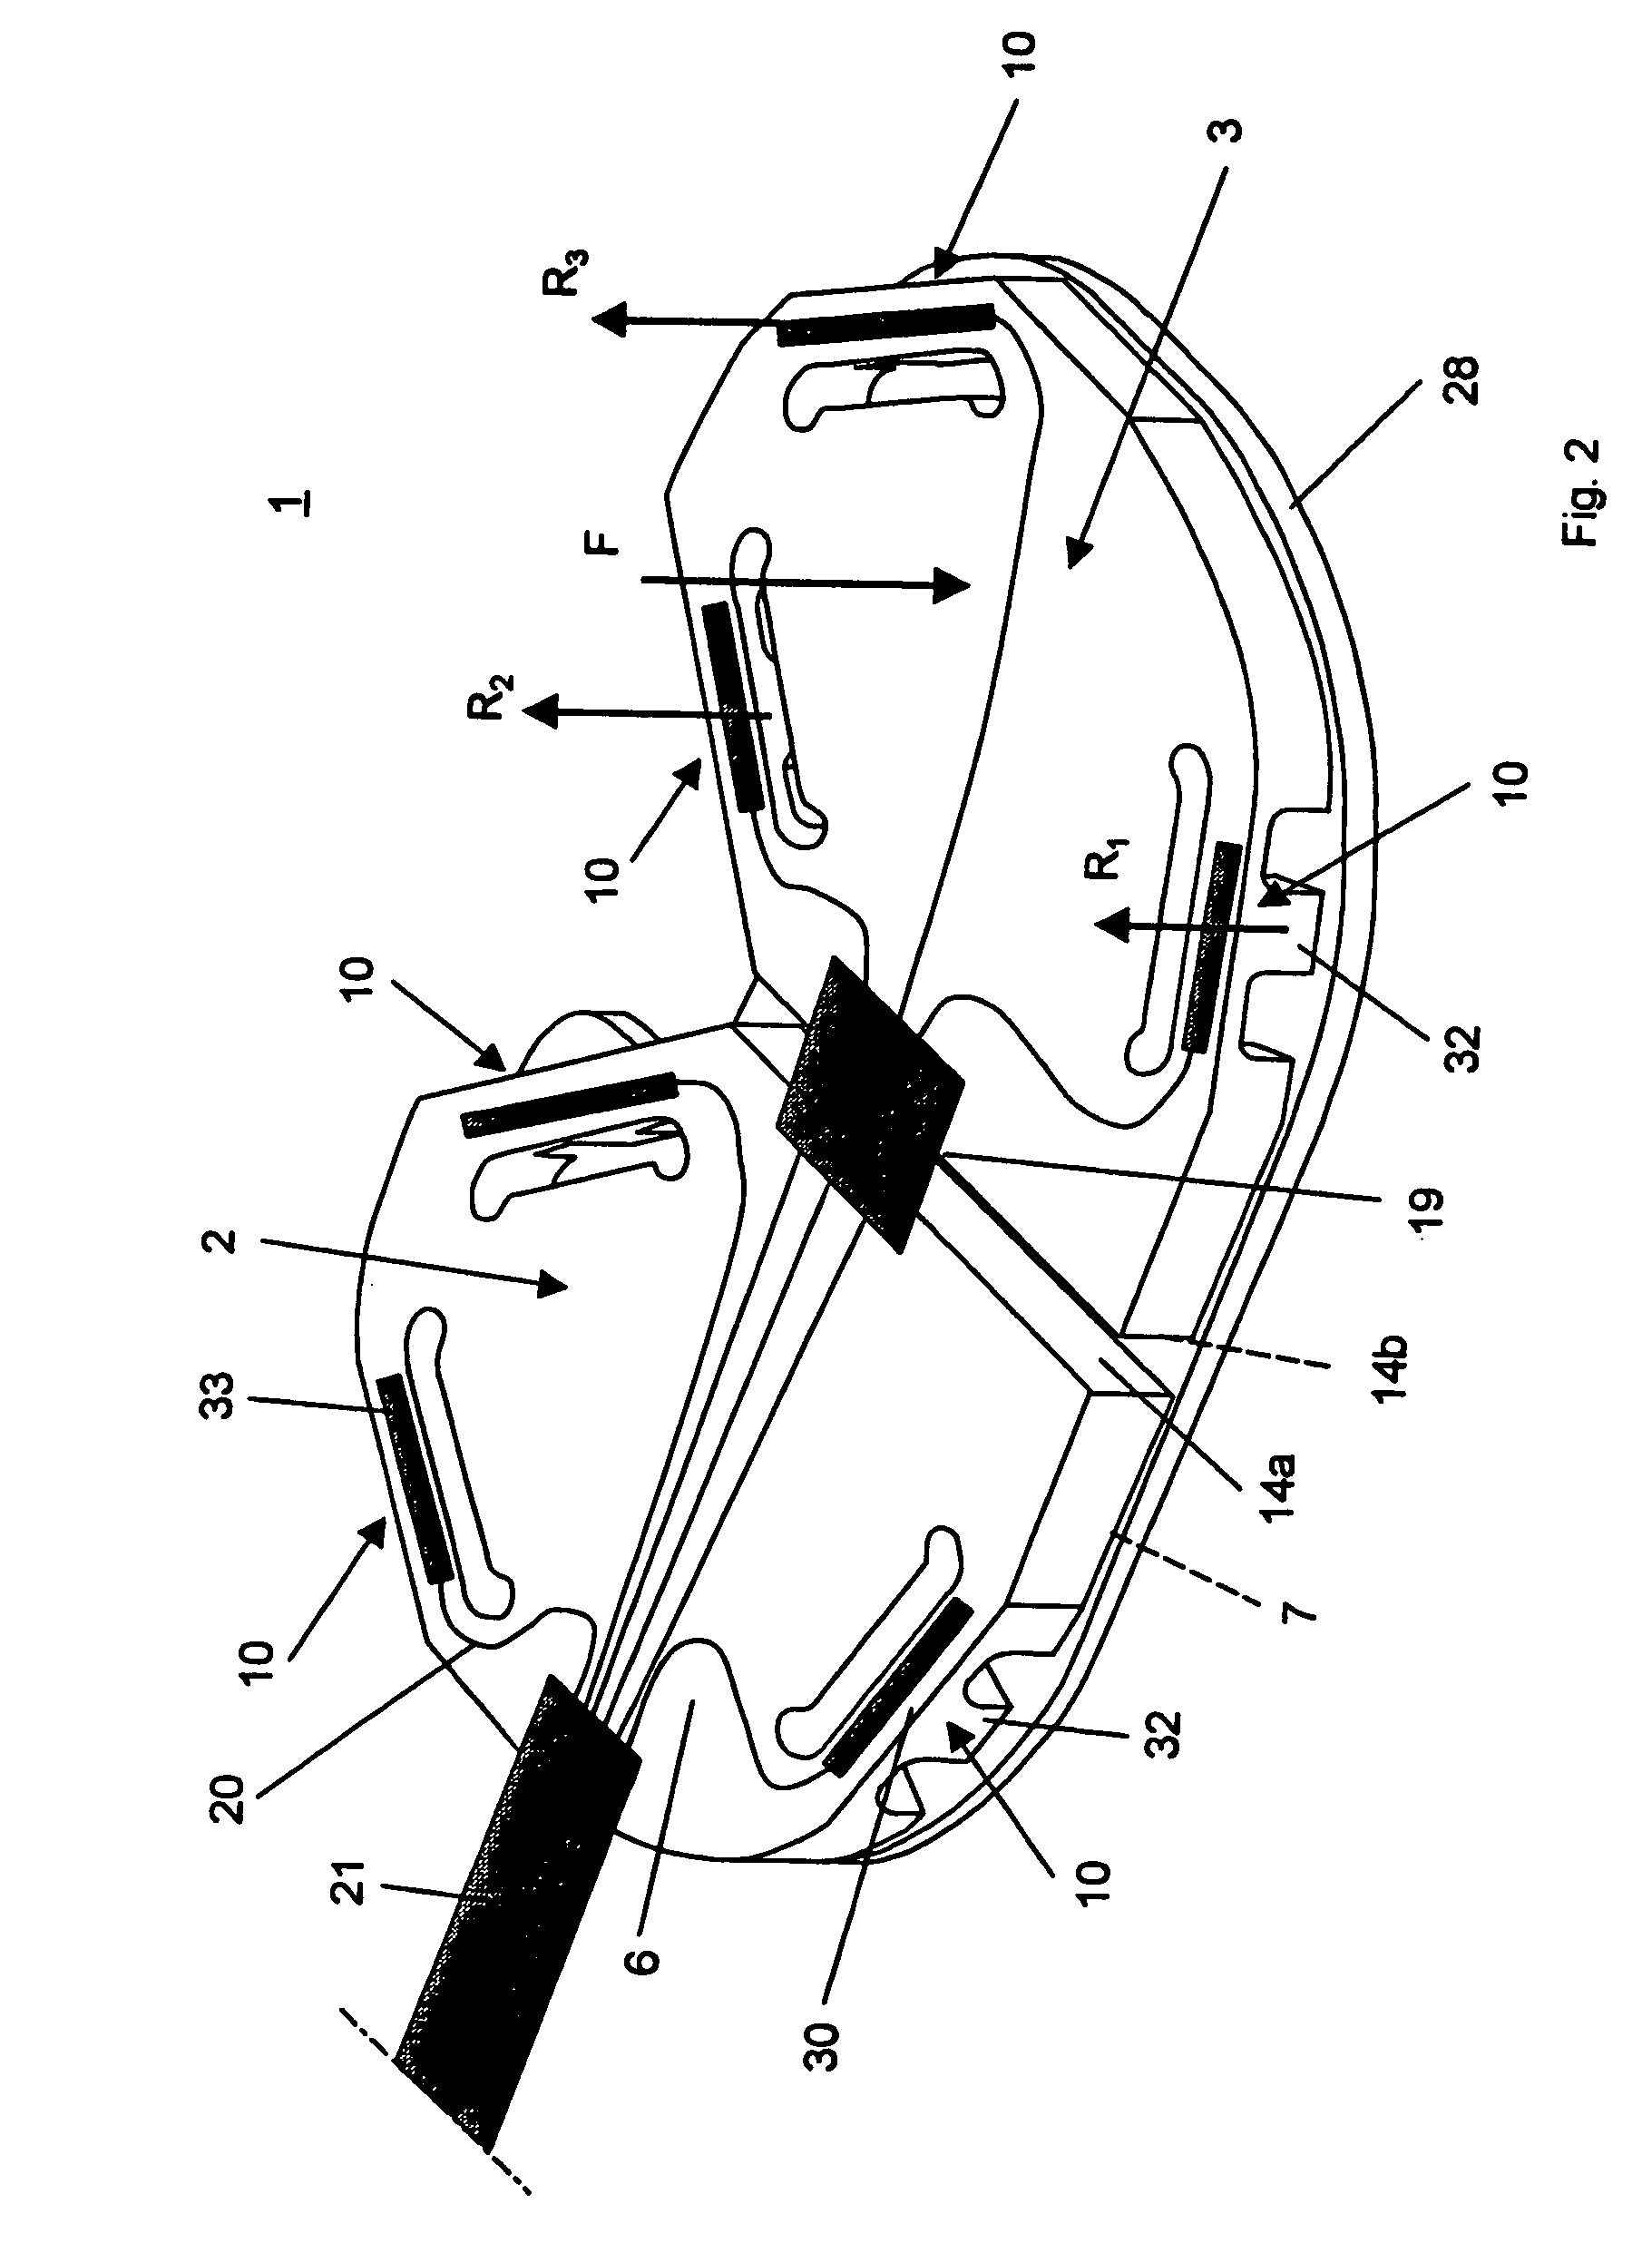 Device for measuring tibio-femoral force amplitudes and force locations in total knee arthroplasty